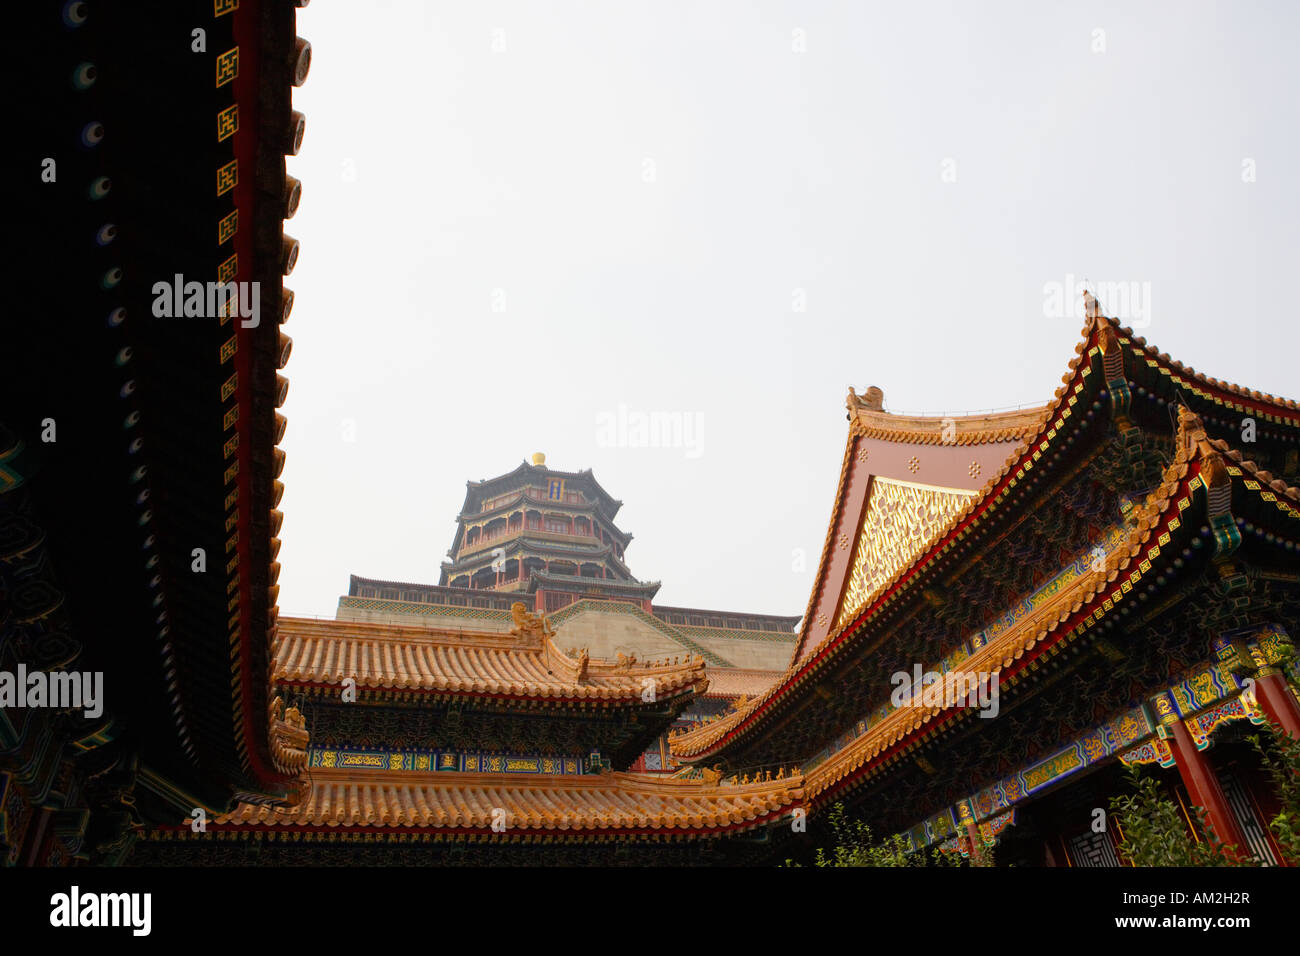 Summer Palace Park Yihe Yuan Hall that Dispels the Clouds and Tower of the Fragrance of the Buddha Beijing China Stock Photo